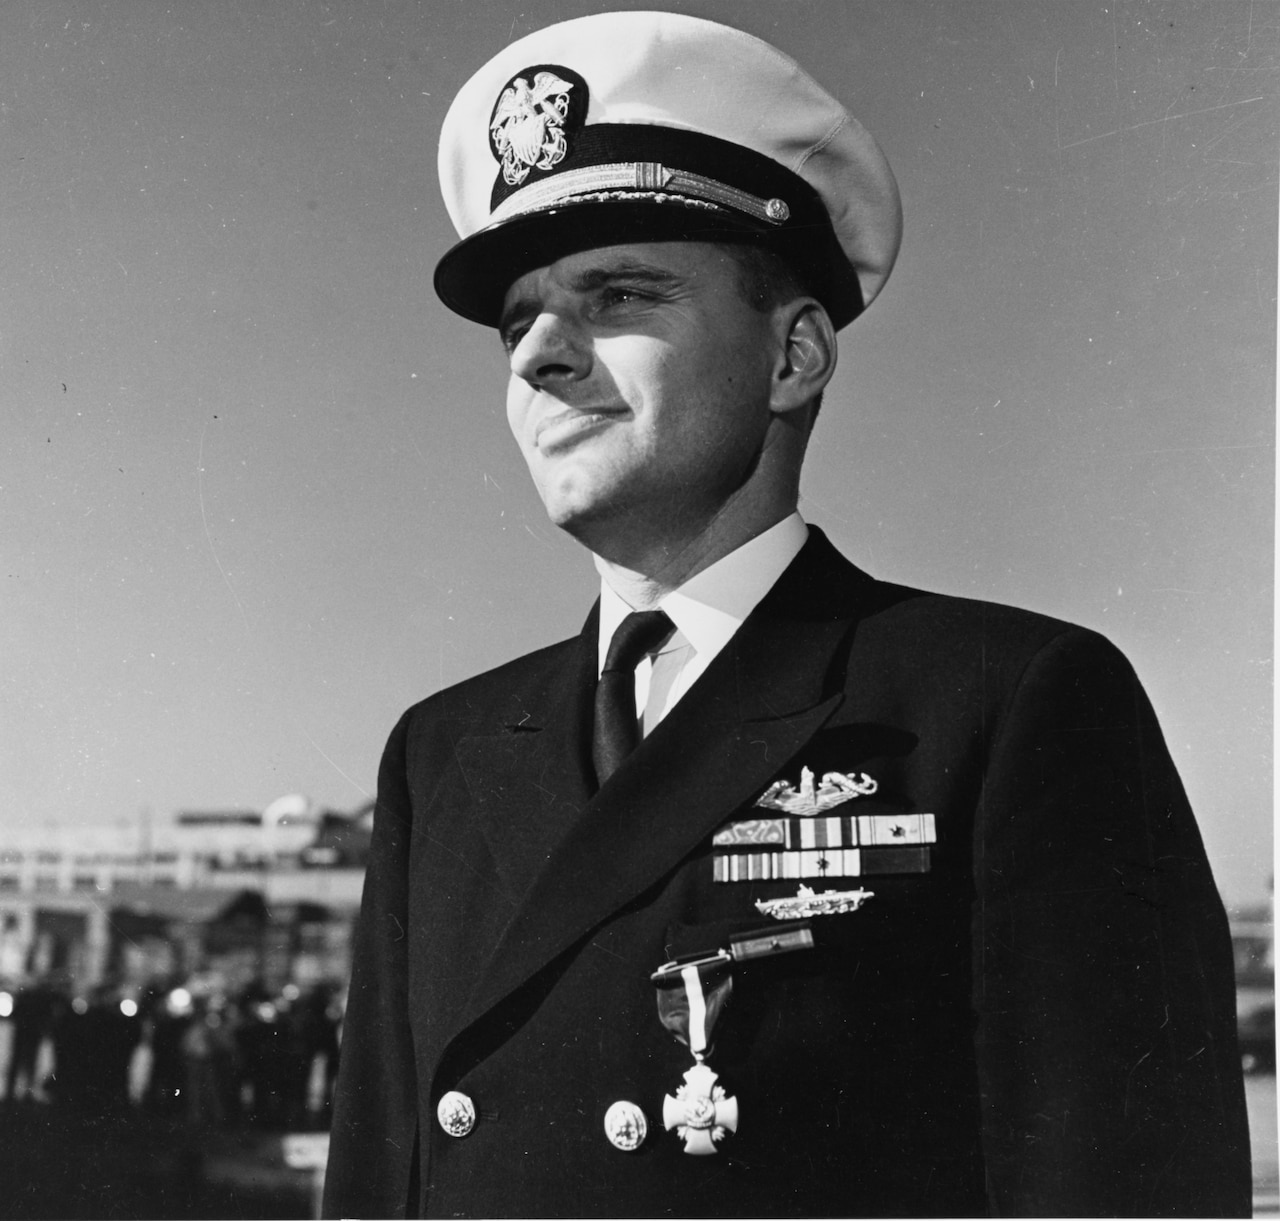 A man in dress uniform looks into the distance.